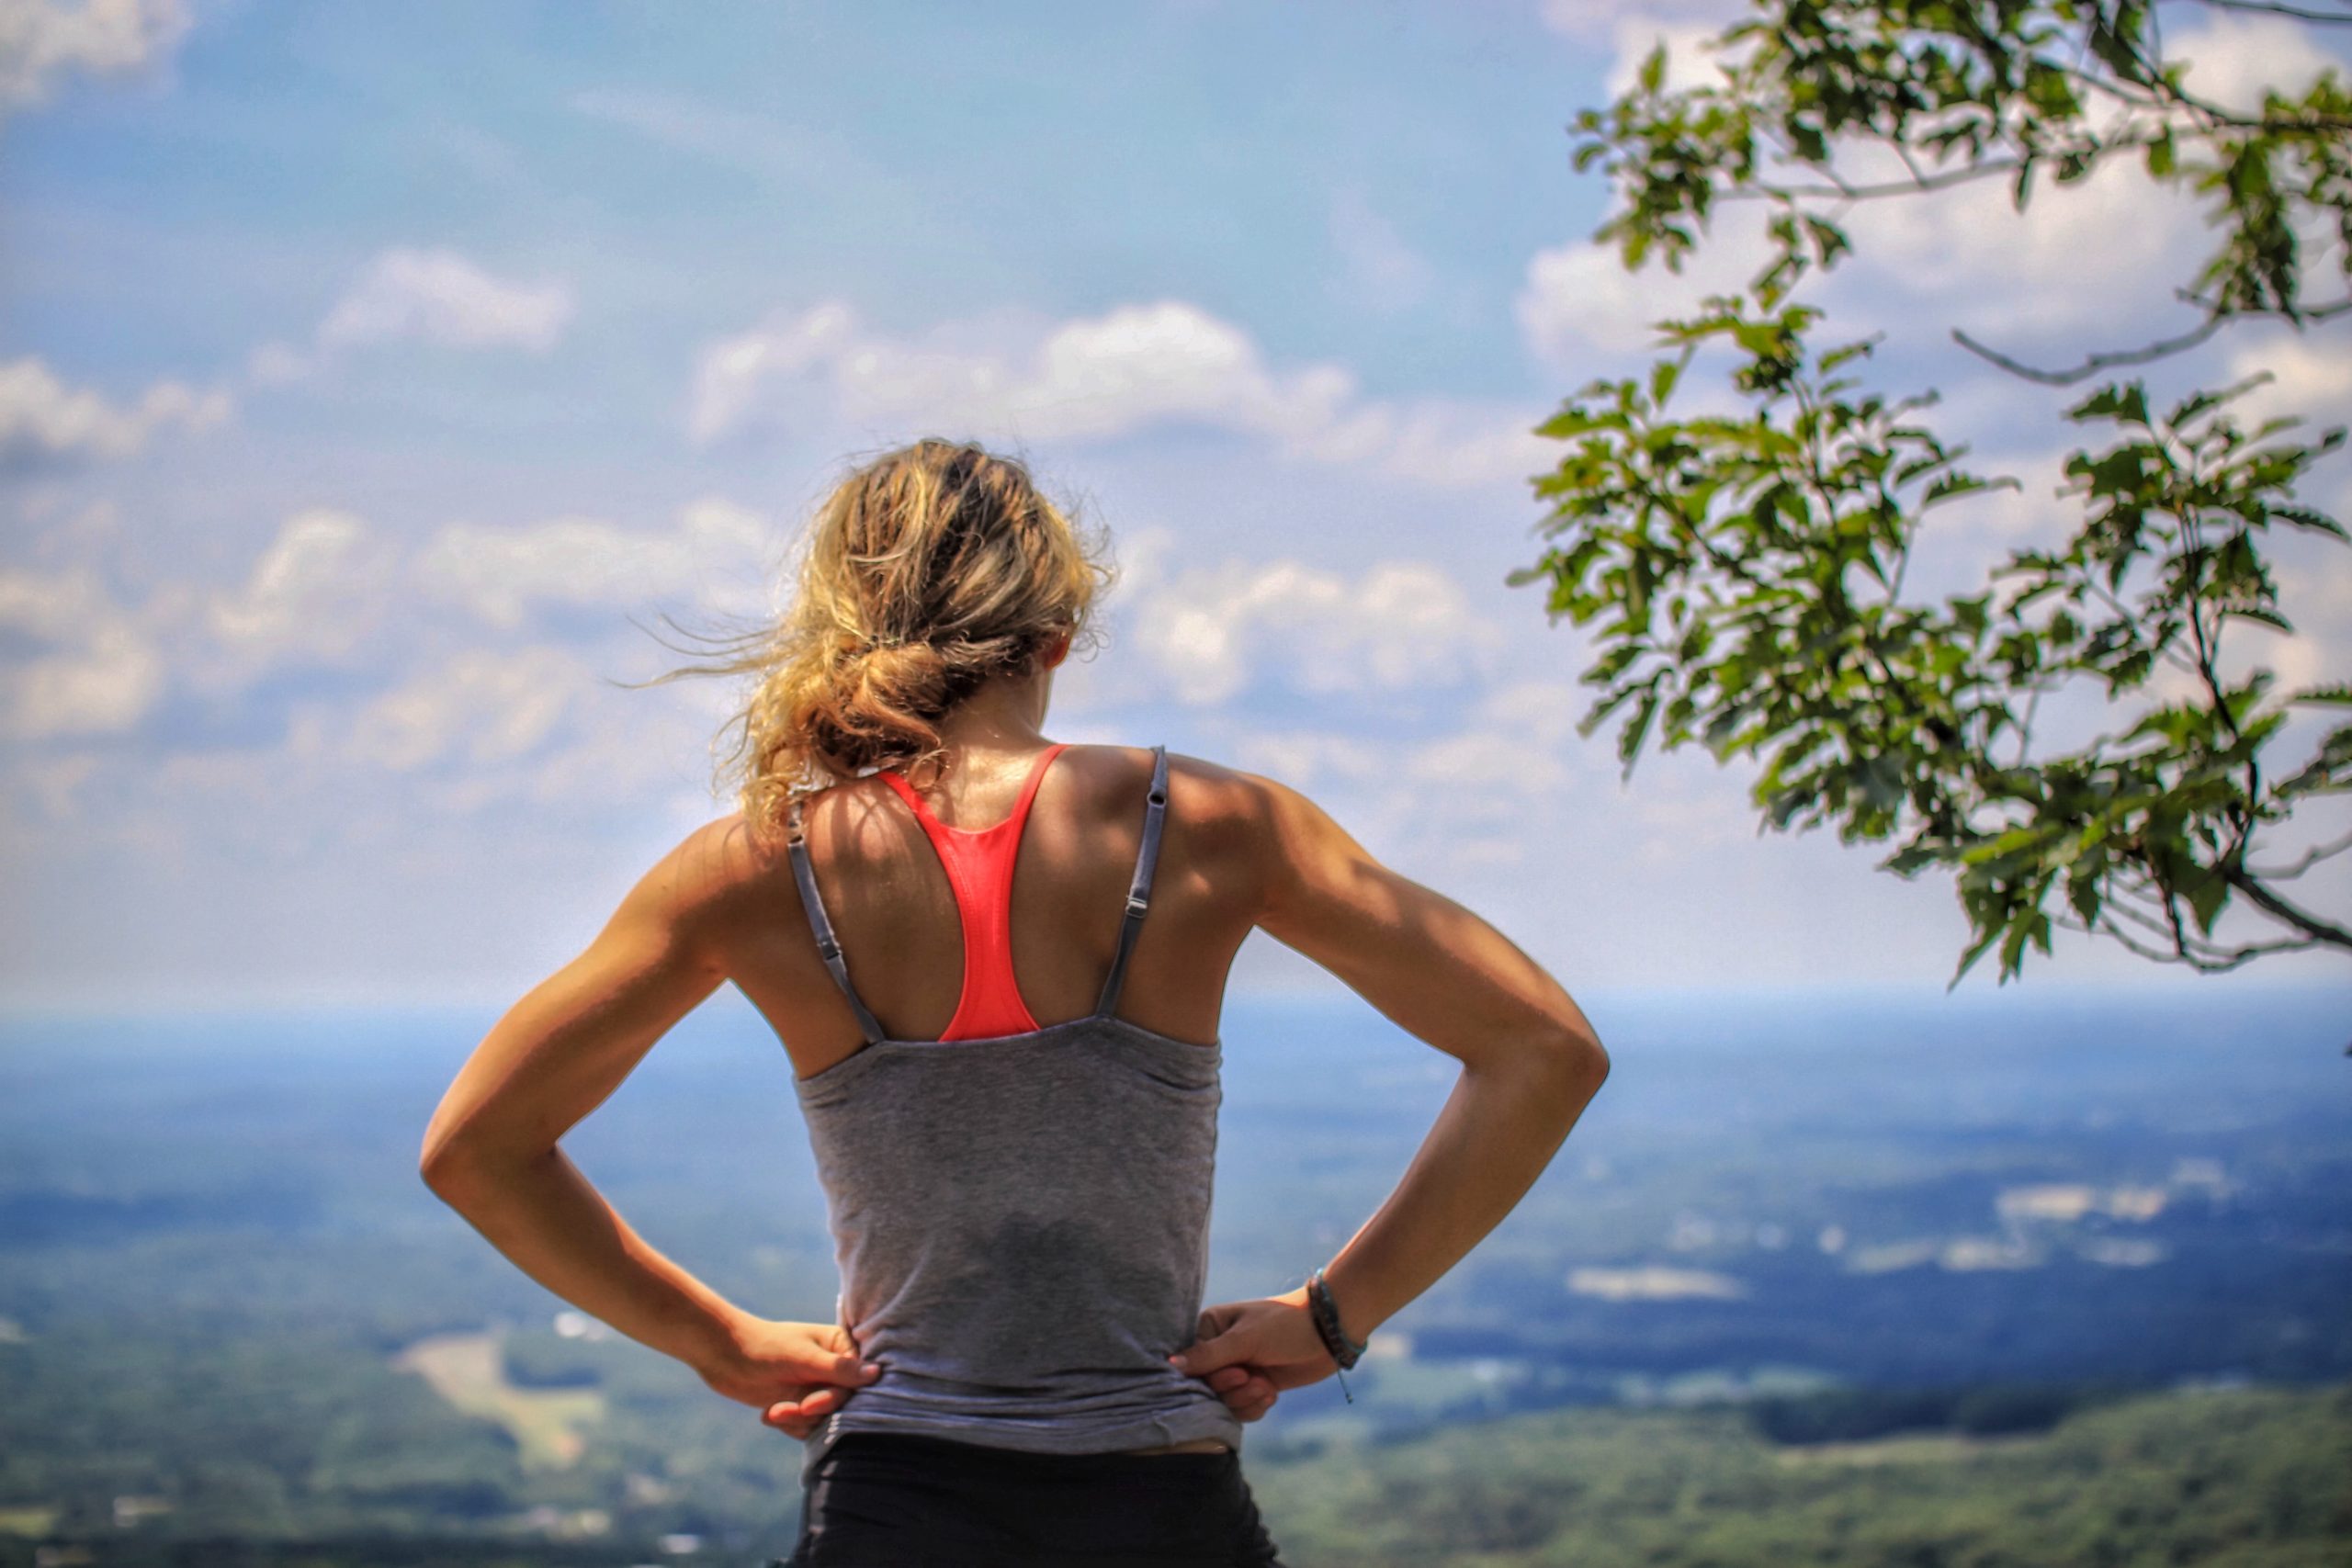 A fir woman in a tank top standing on a hill, looking outwards.